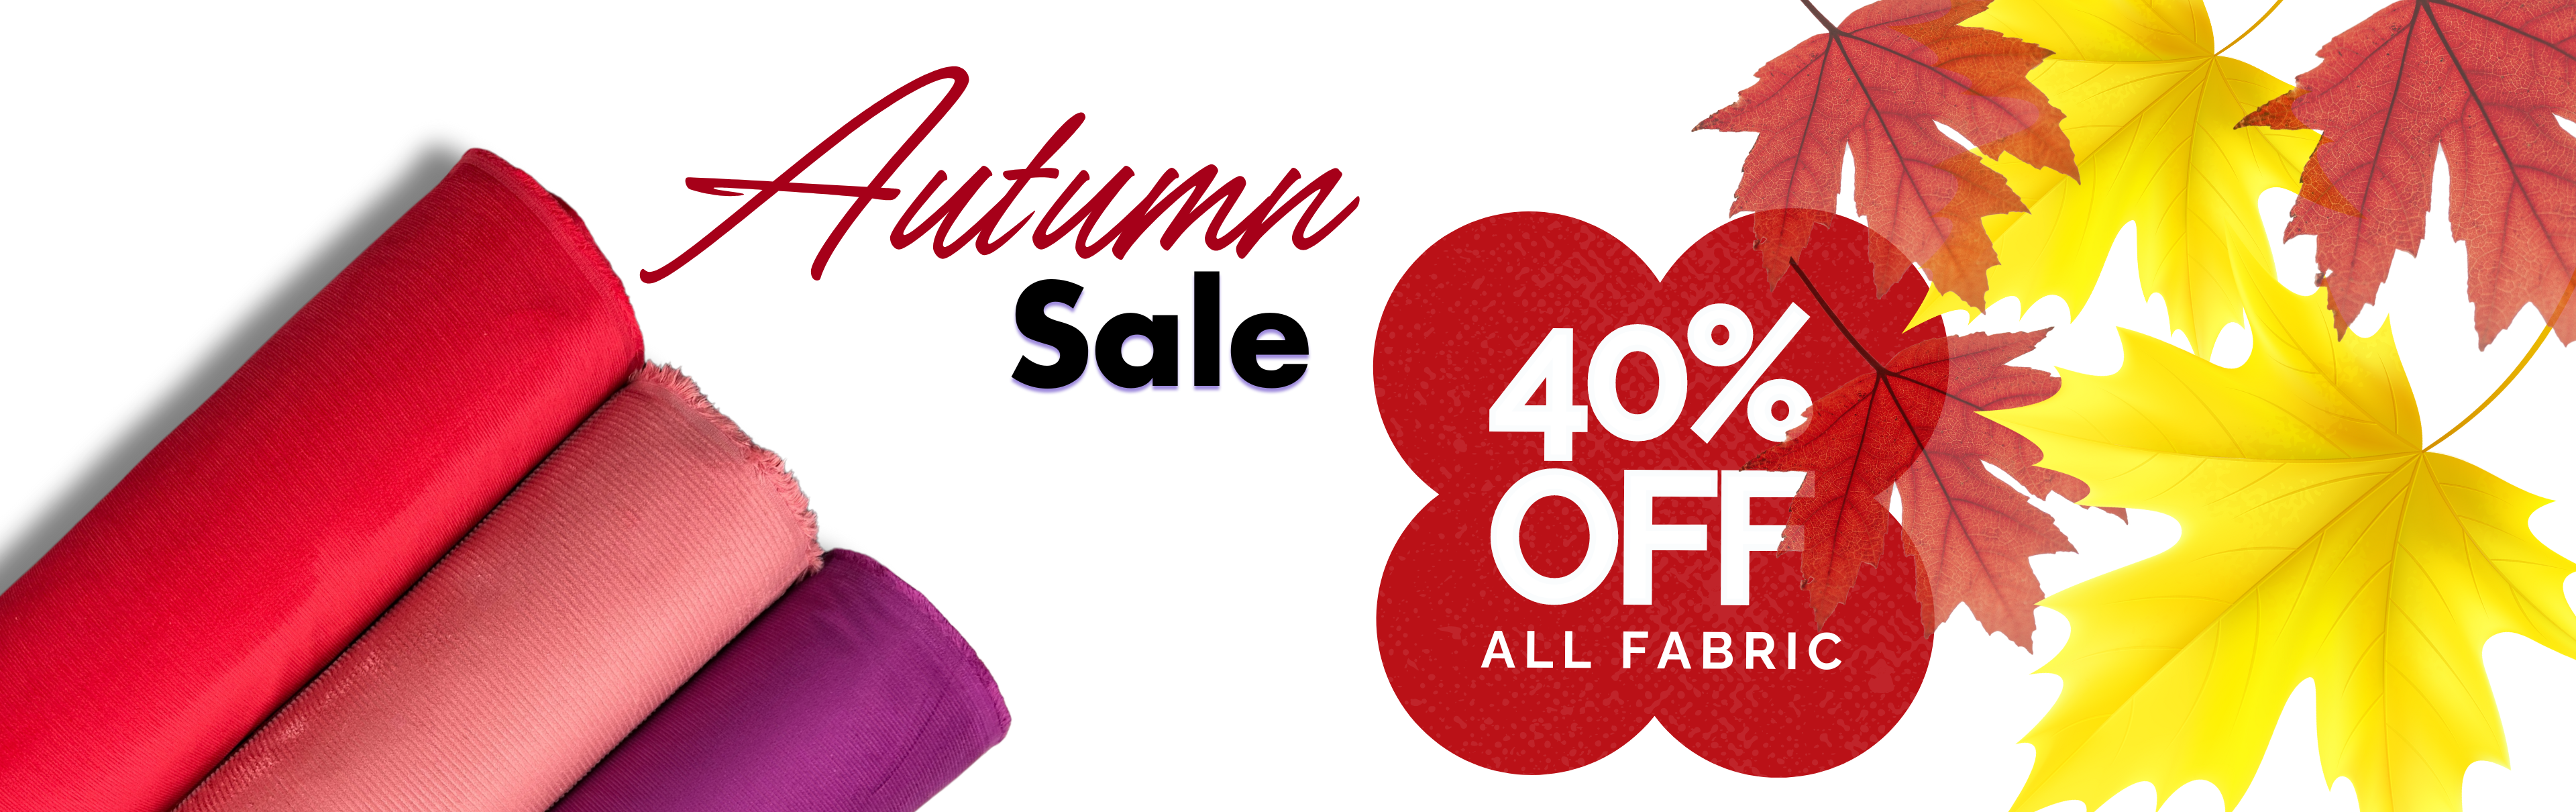 Autumn Sale Super Cheap Fabrics Online Store Sale On Now. 40% All Fabric Showcasing Newest Arrivals And Great Offerings